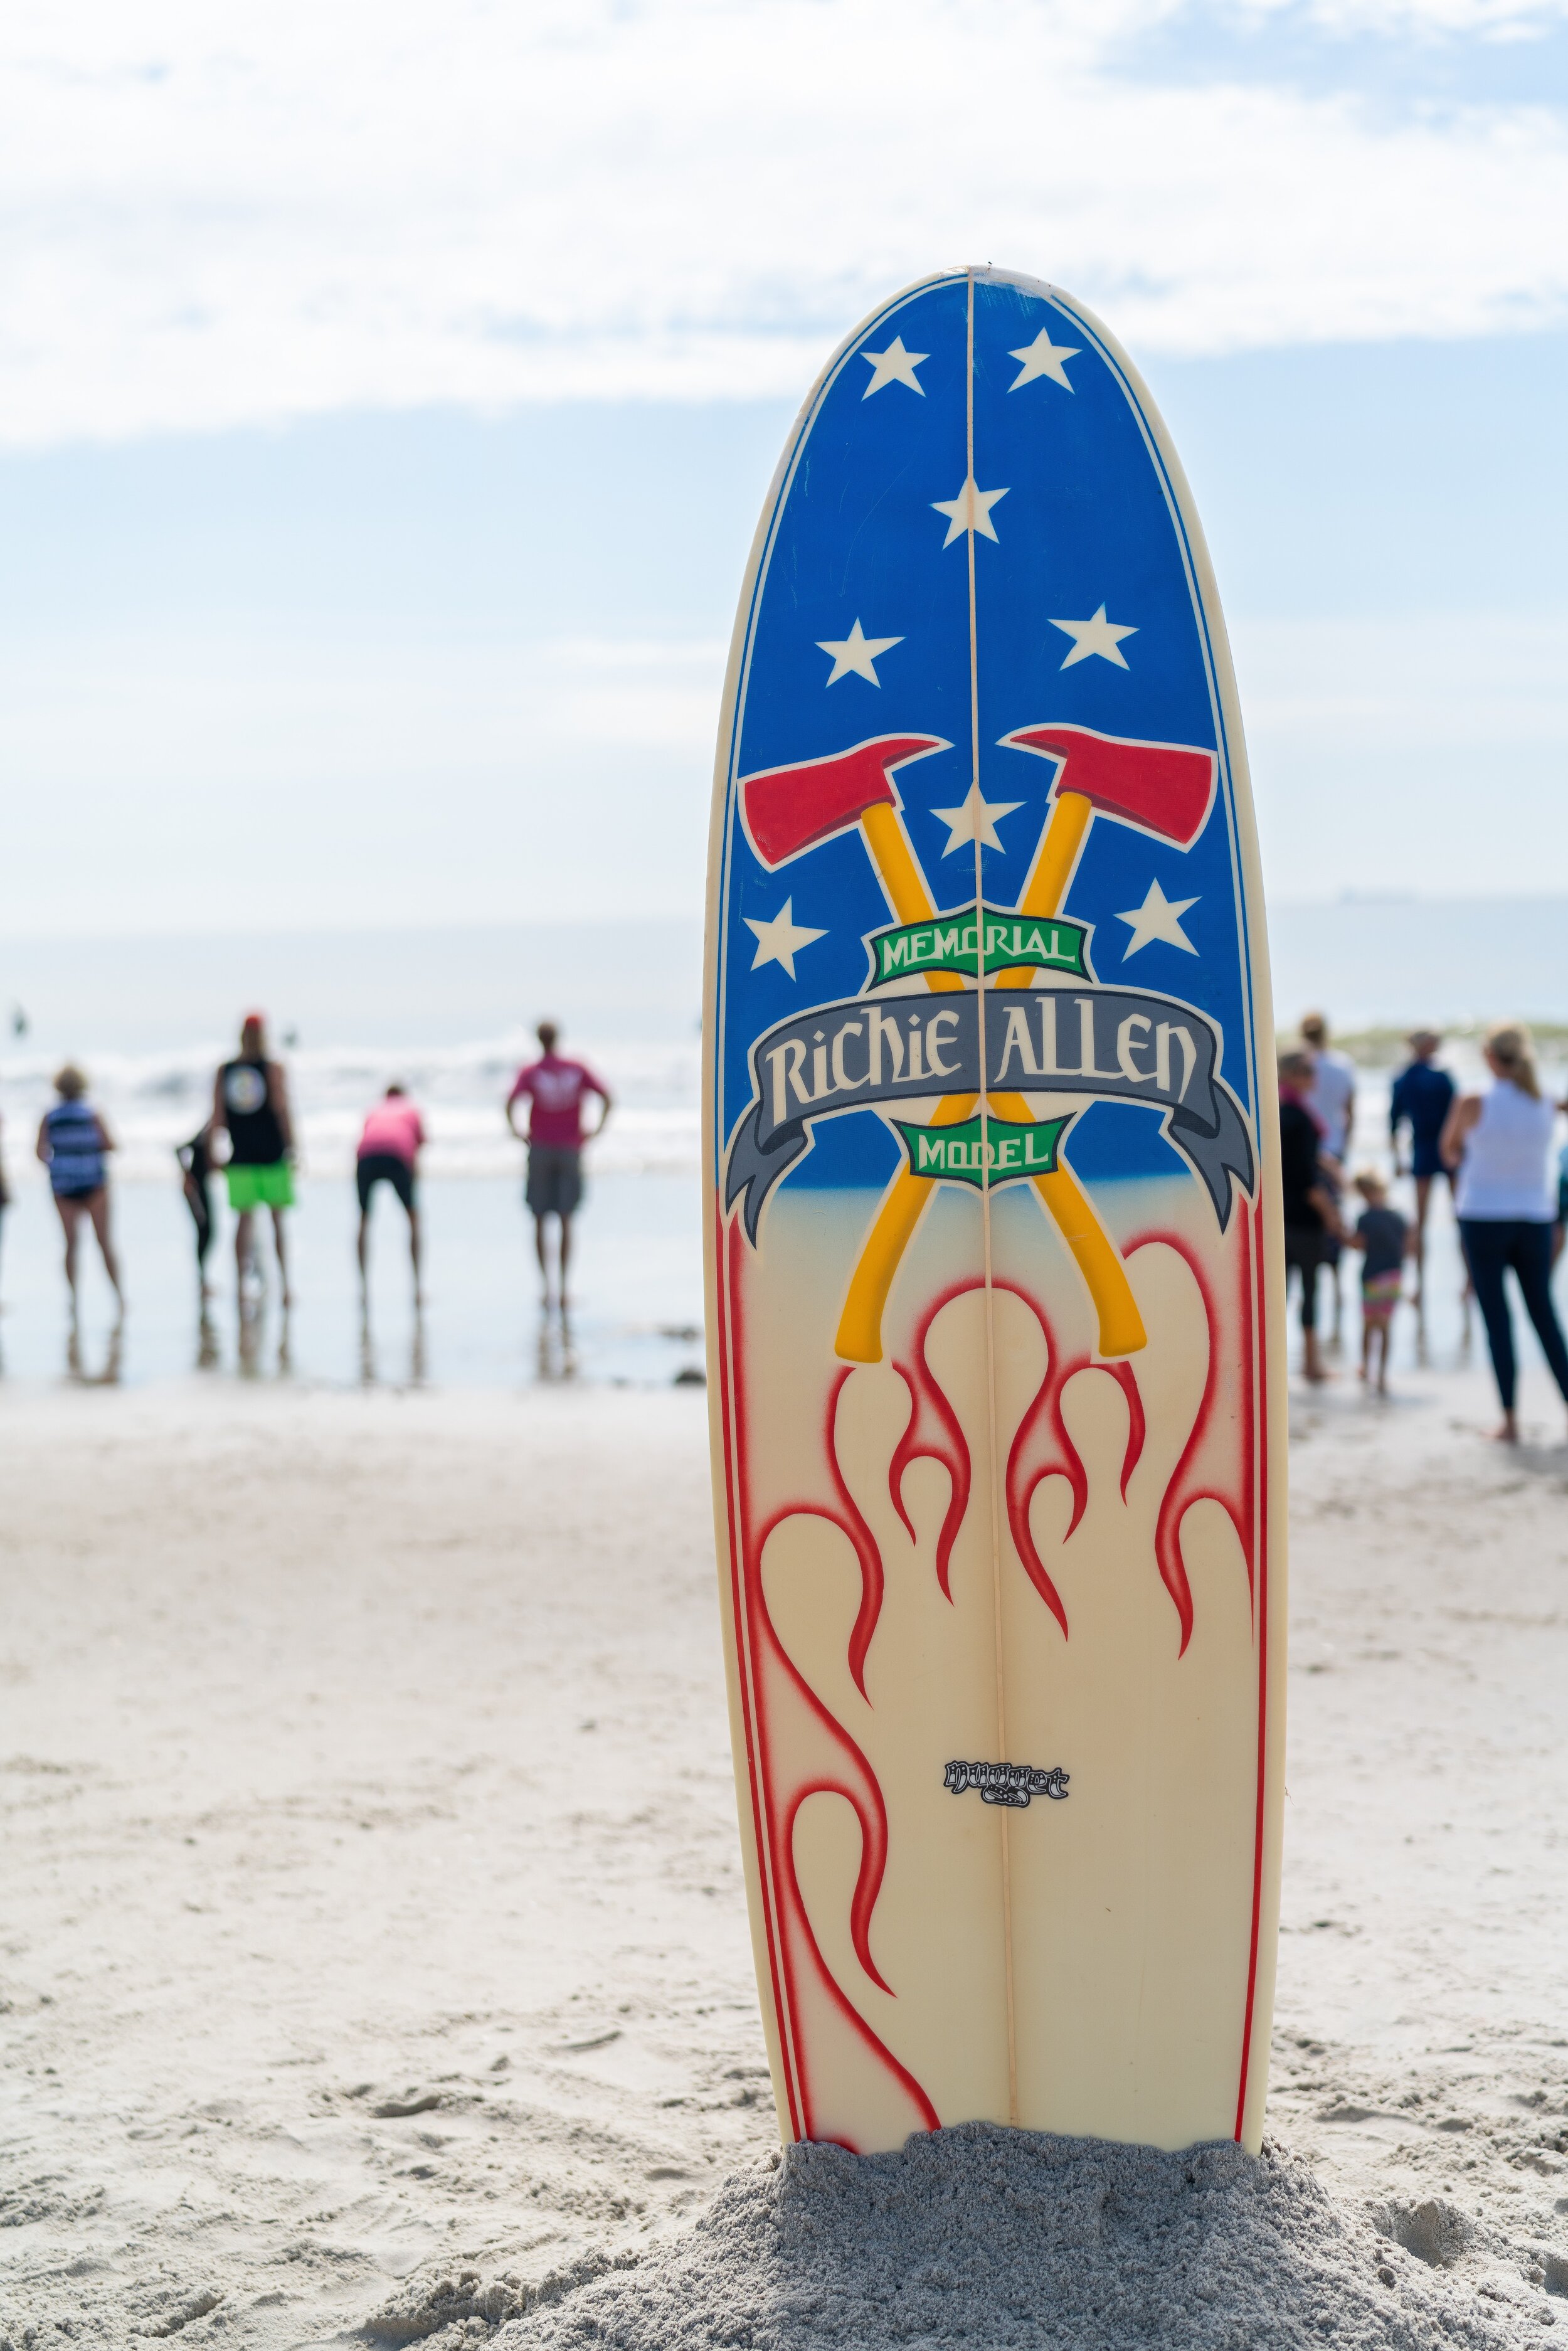   Richie's friends and family have designed a surfboard in his memory.  